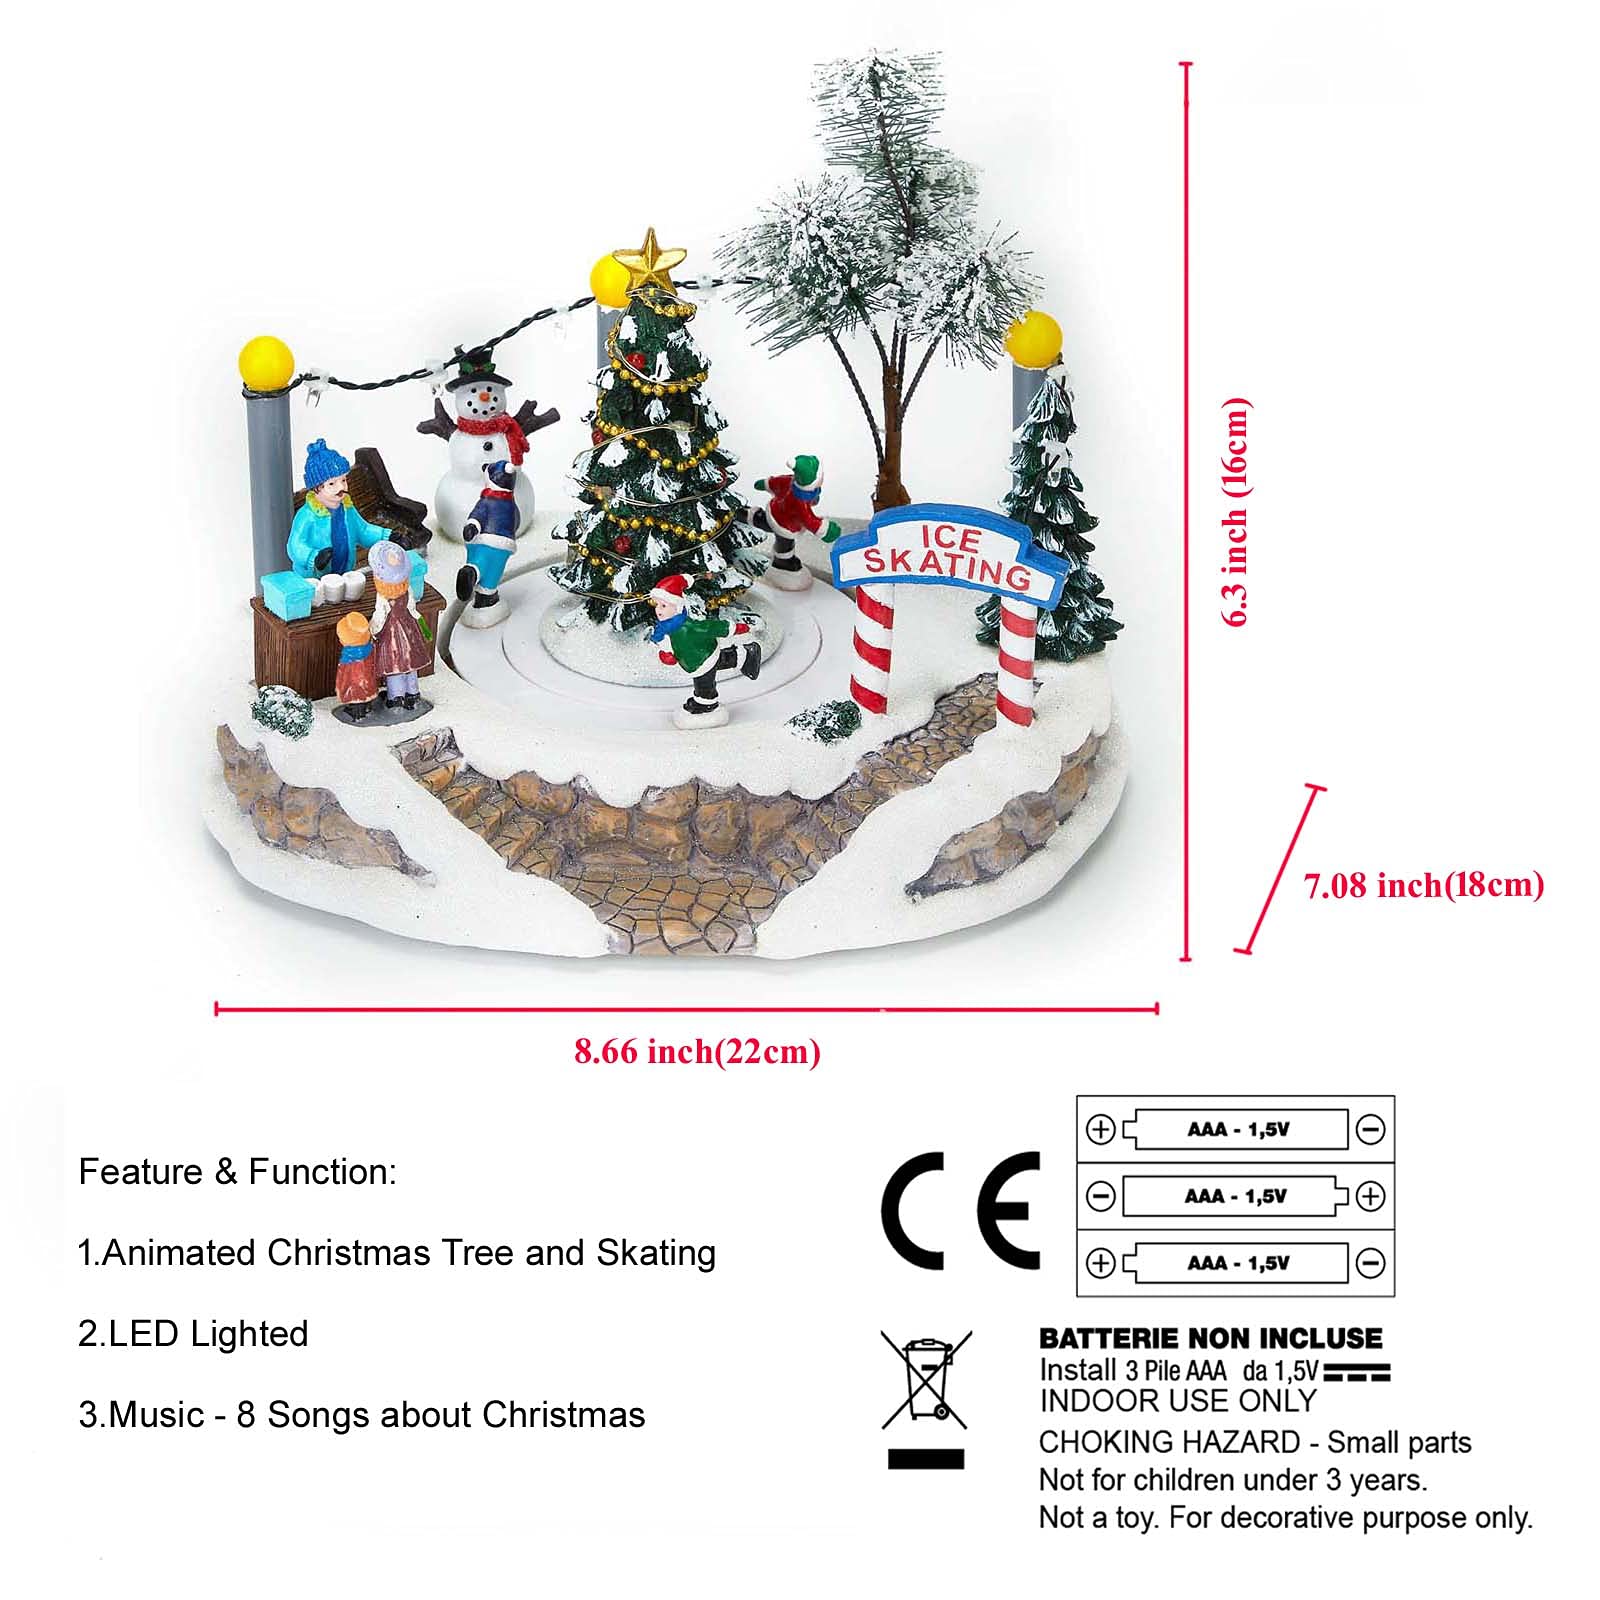 innodept12 Winter LED-Lighted Christmas Village Scene, Illuminated & Animated Lighted Musical Christmas Village with Center Tree and Moving Ice Skating Rink Decoration, Battery Operated